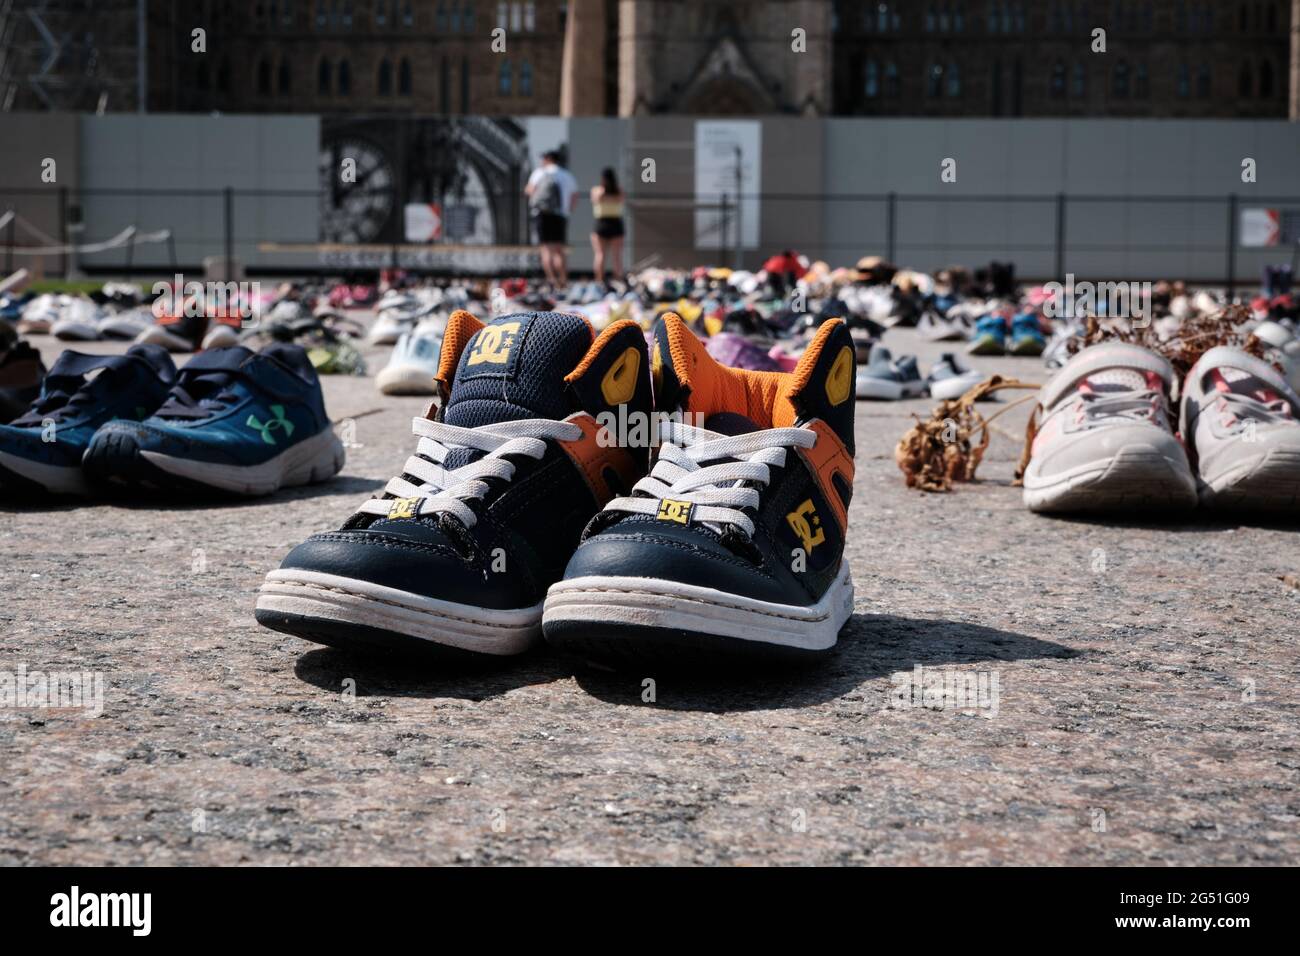 Children shoes at Memorial in tribute to aboriginal children whose remain found in Residential Schools in Canada.  Parliament Hill, Ottawa Stock Photo